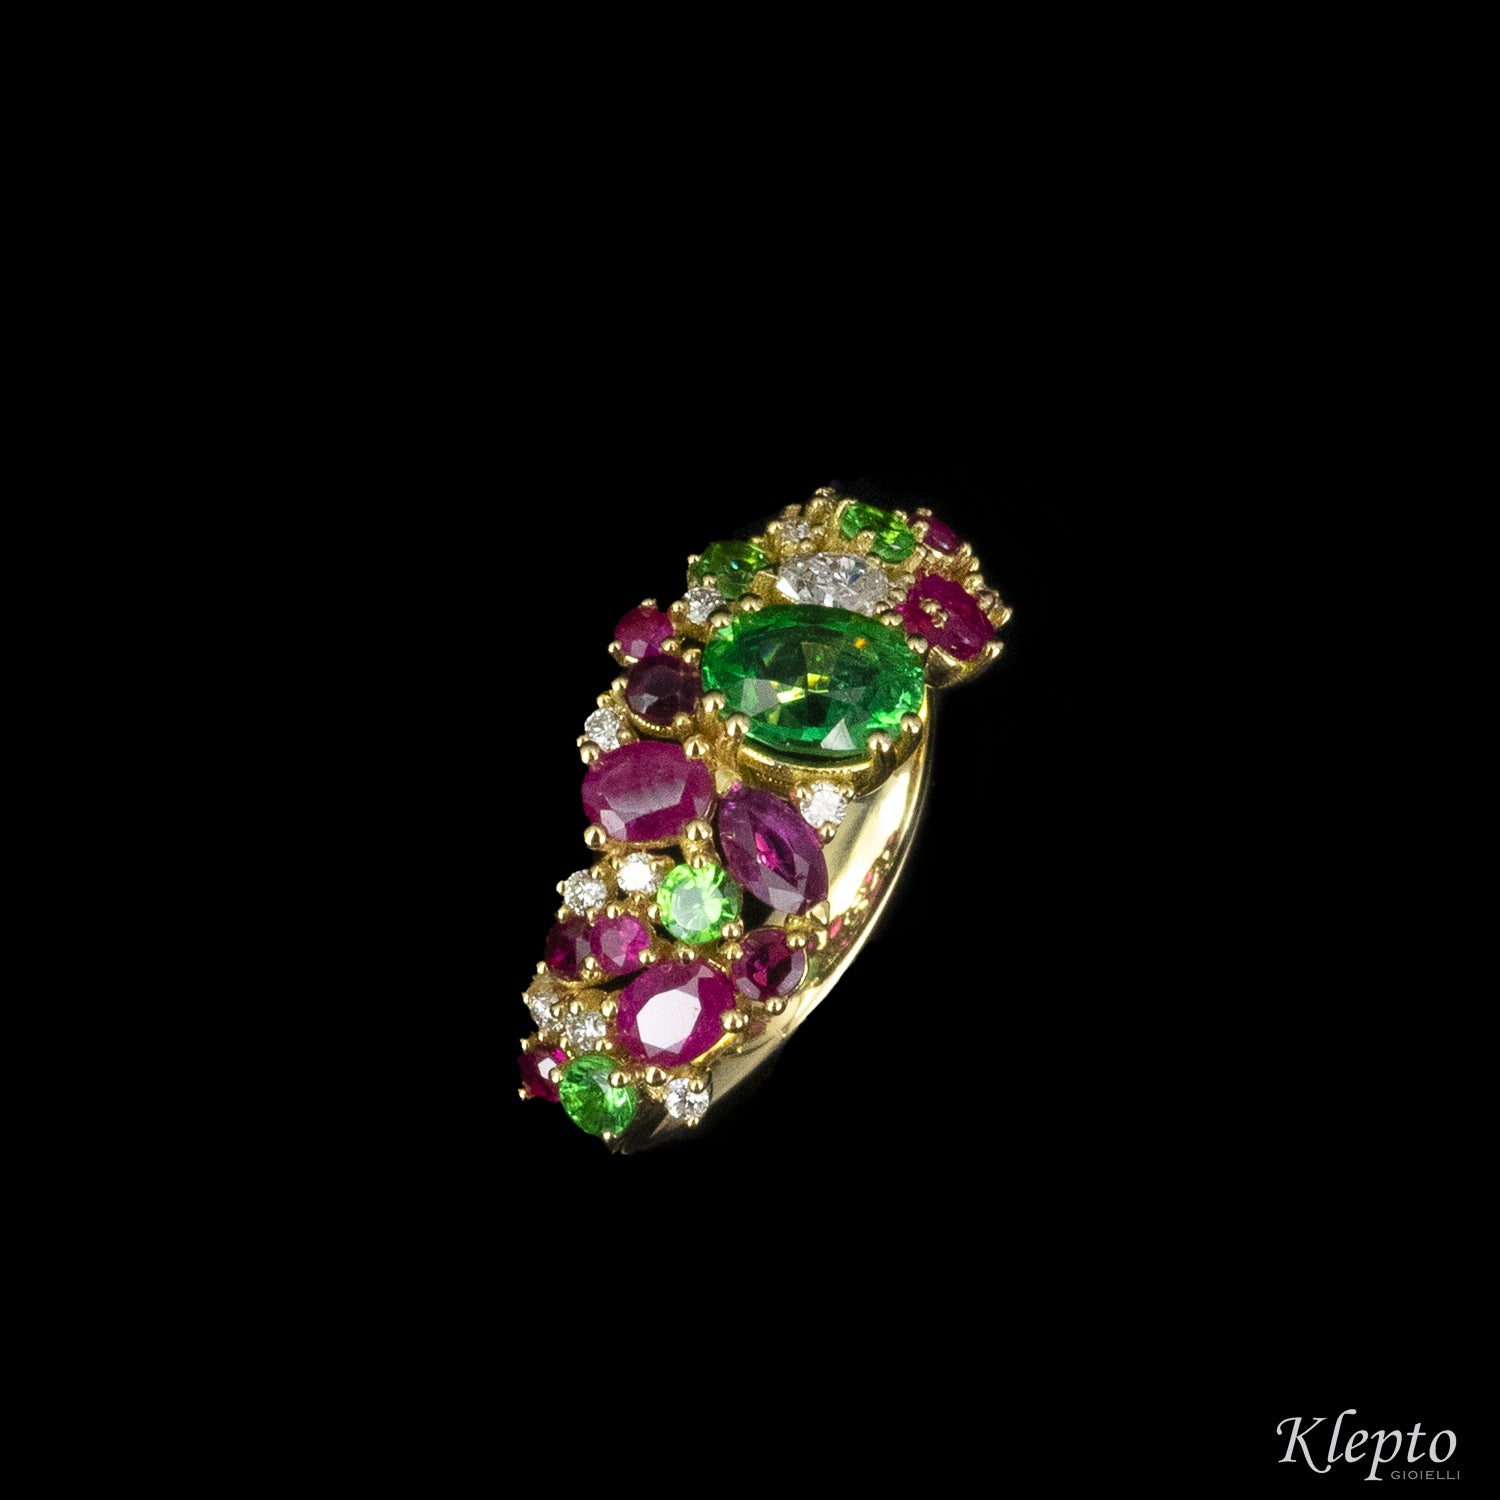 Classic ring in yellow gold with green garnets, rubies and diamonds